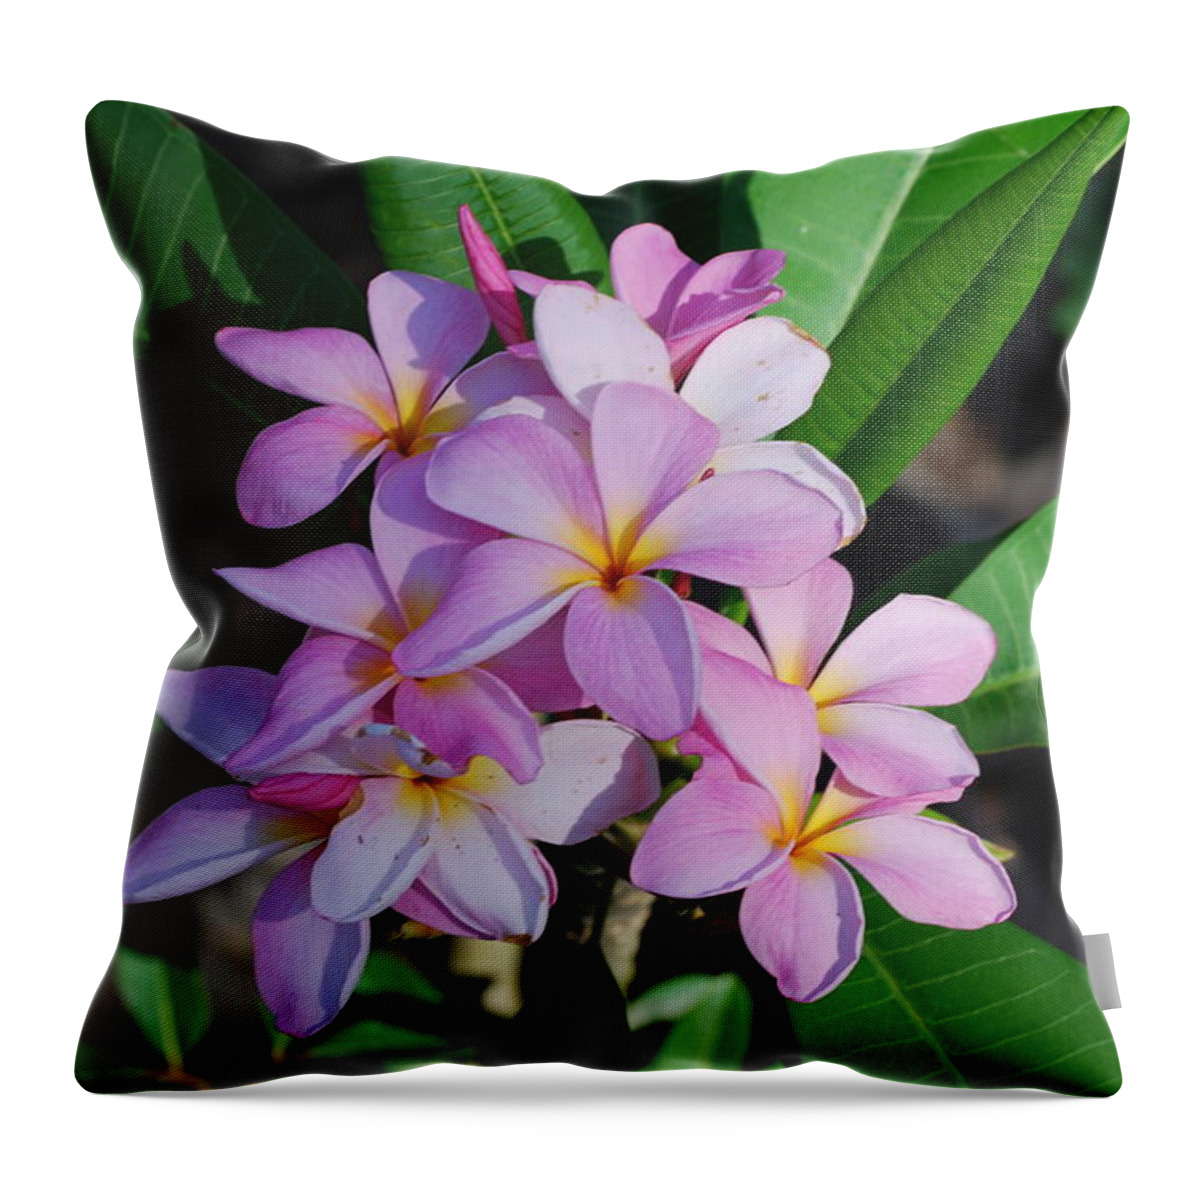 Used By Hawaiian People To Make Necklace Throw Pillow featuring the photograph Hawaiian lei flower by Robert Floyd